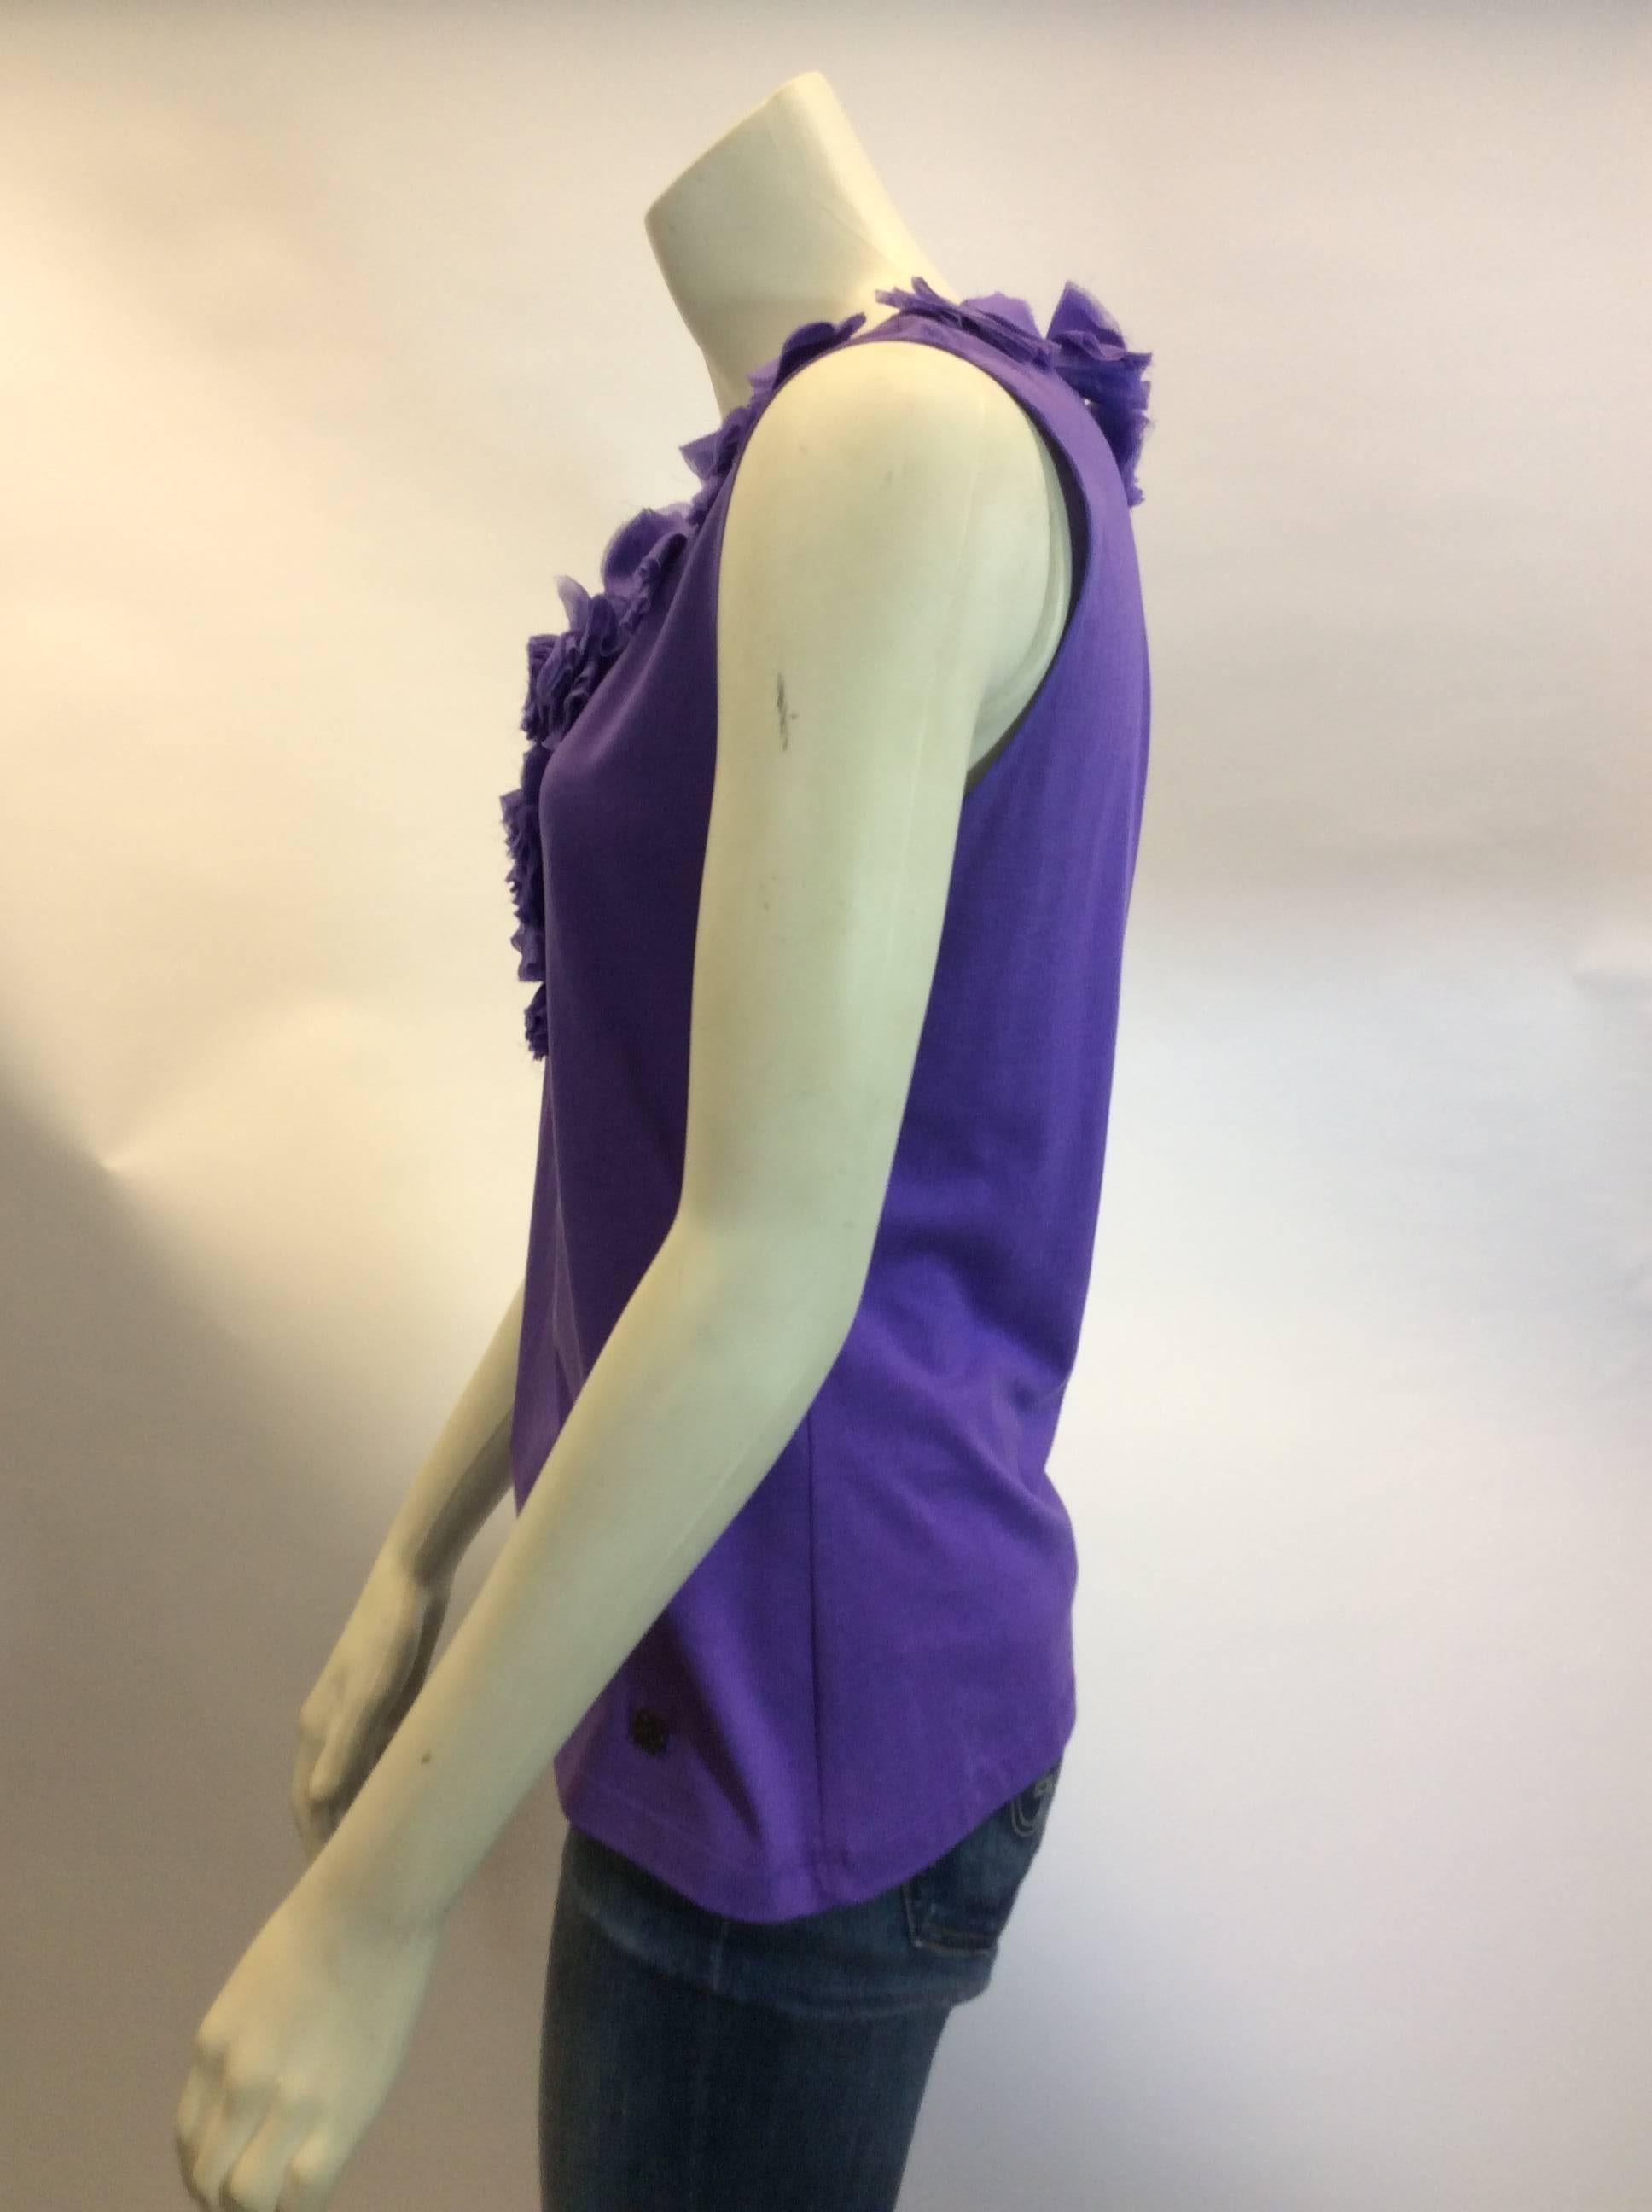 Carolina Herrera Purple Sleeveless Top In Excellent Condition For Sale In Narberth, PA